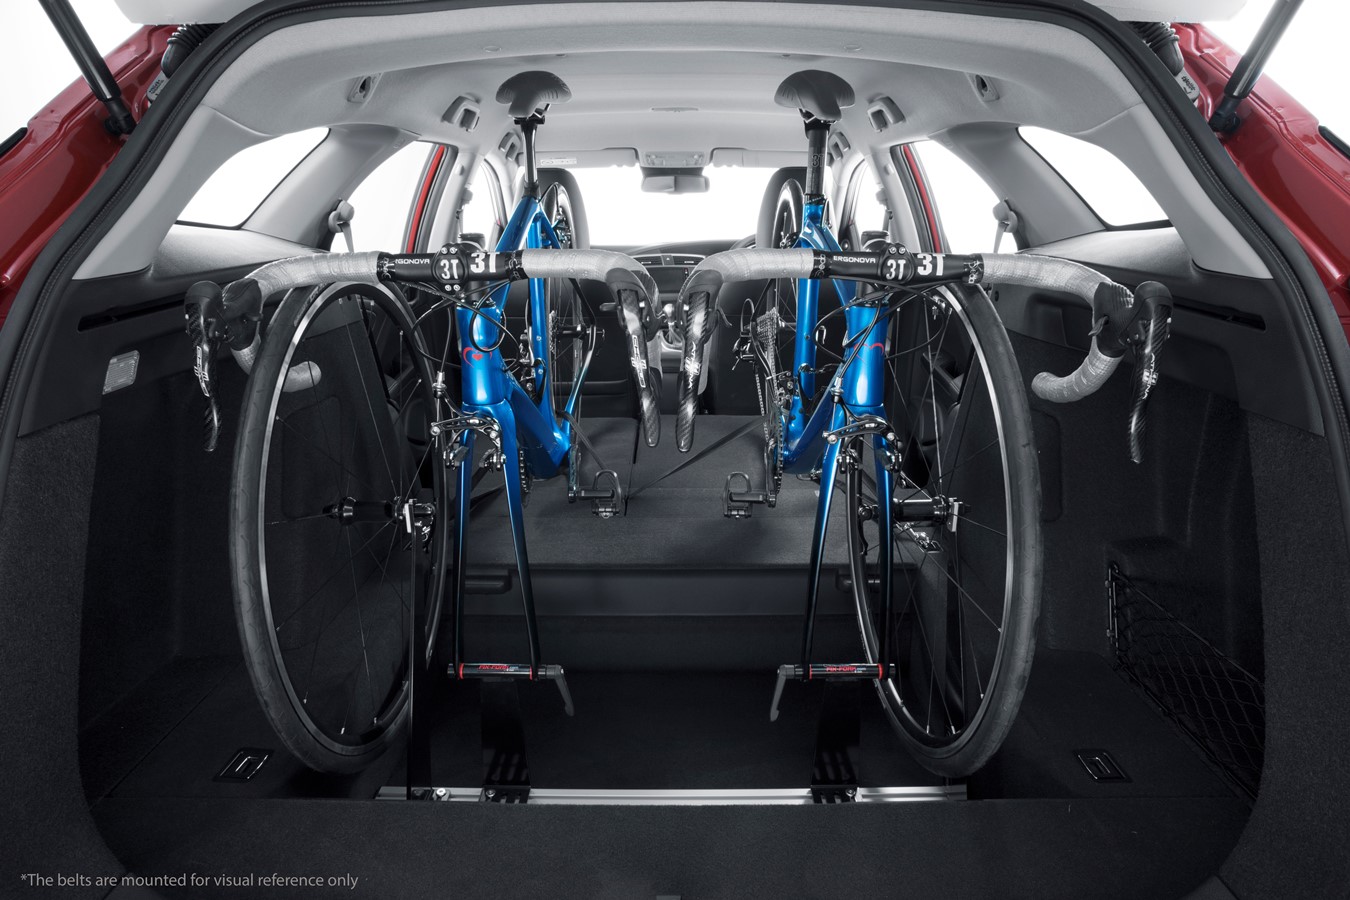  Choose Honda if you love your bike! Honda launches in-car  bicycle rack for Civic Tourer